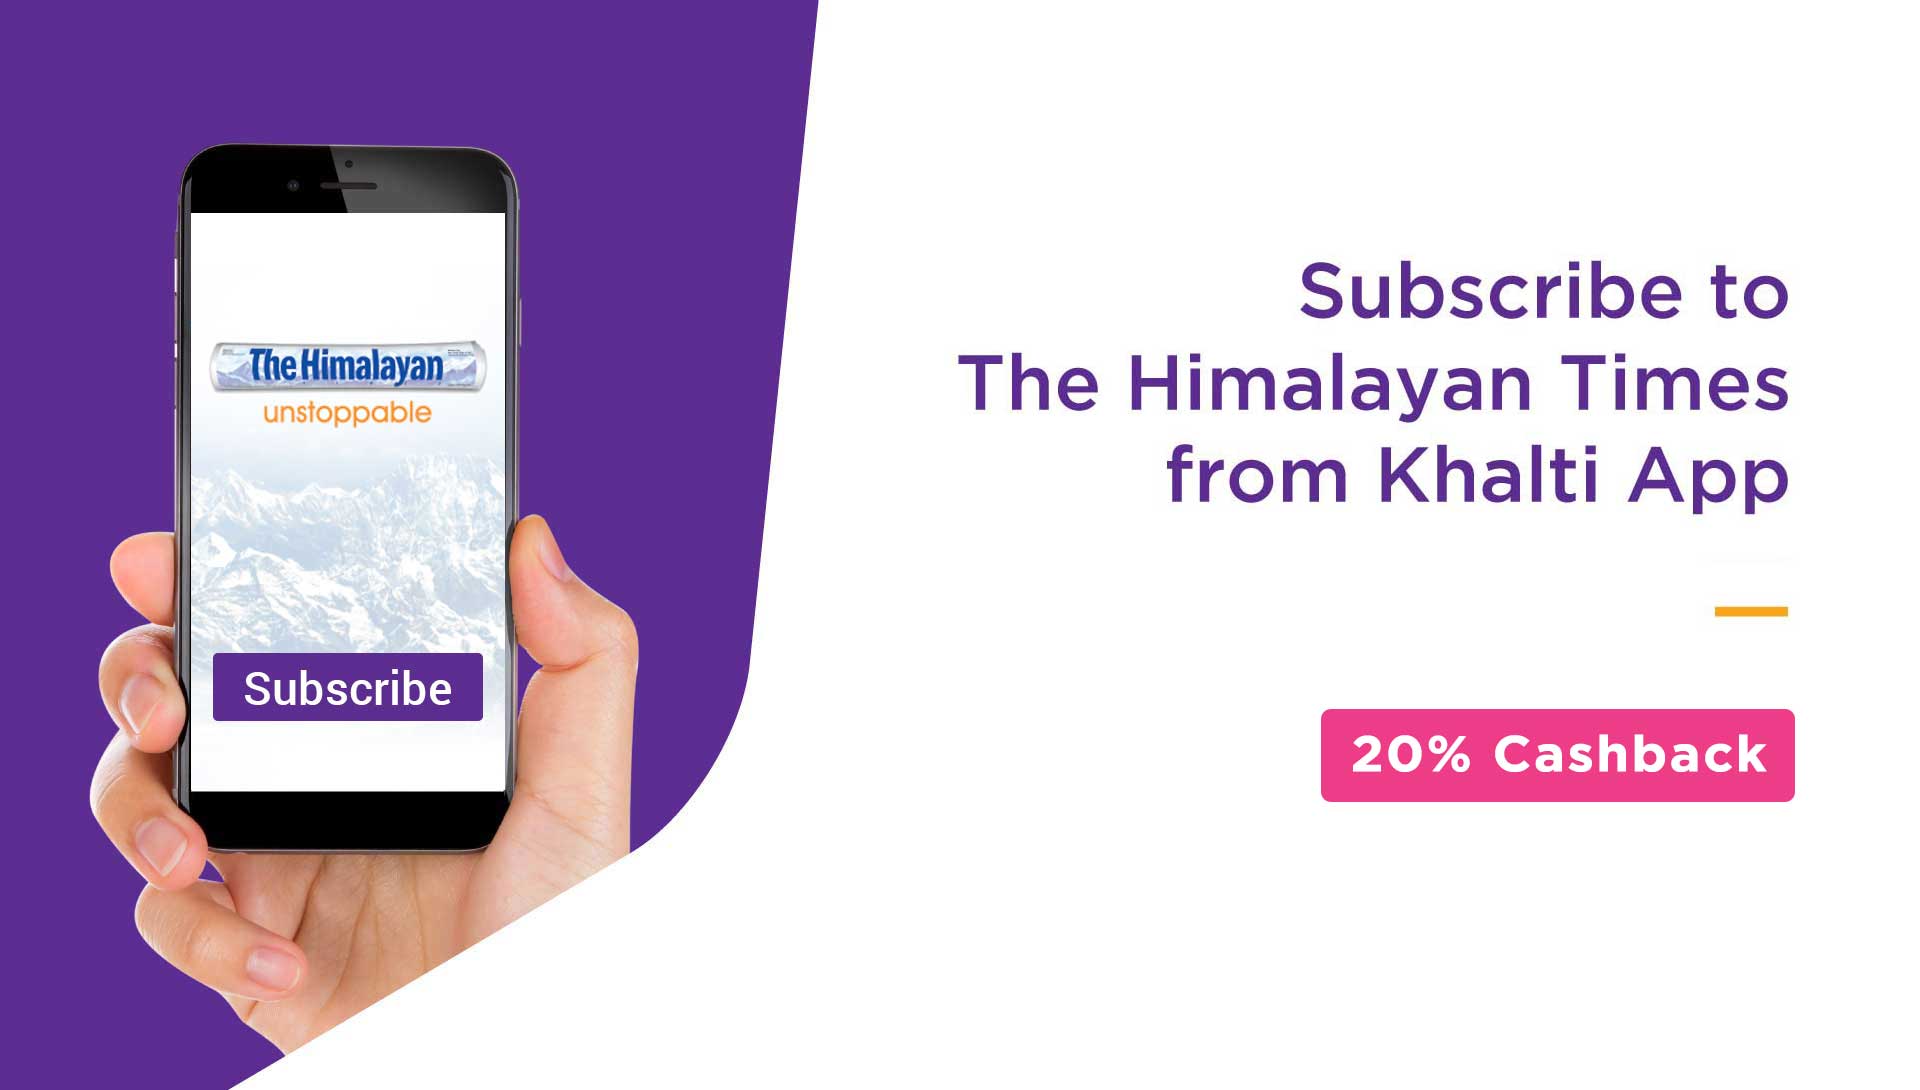 Subscribe The Himalayan Times from Khalti app and get 20% cashback instantly